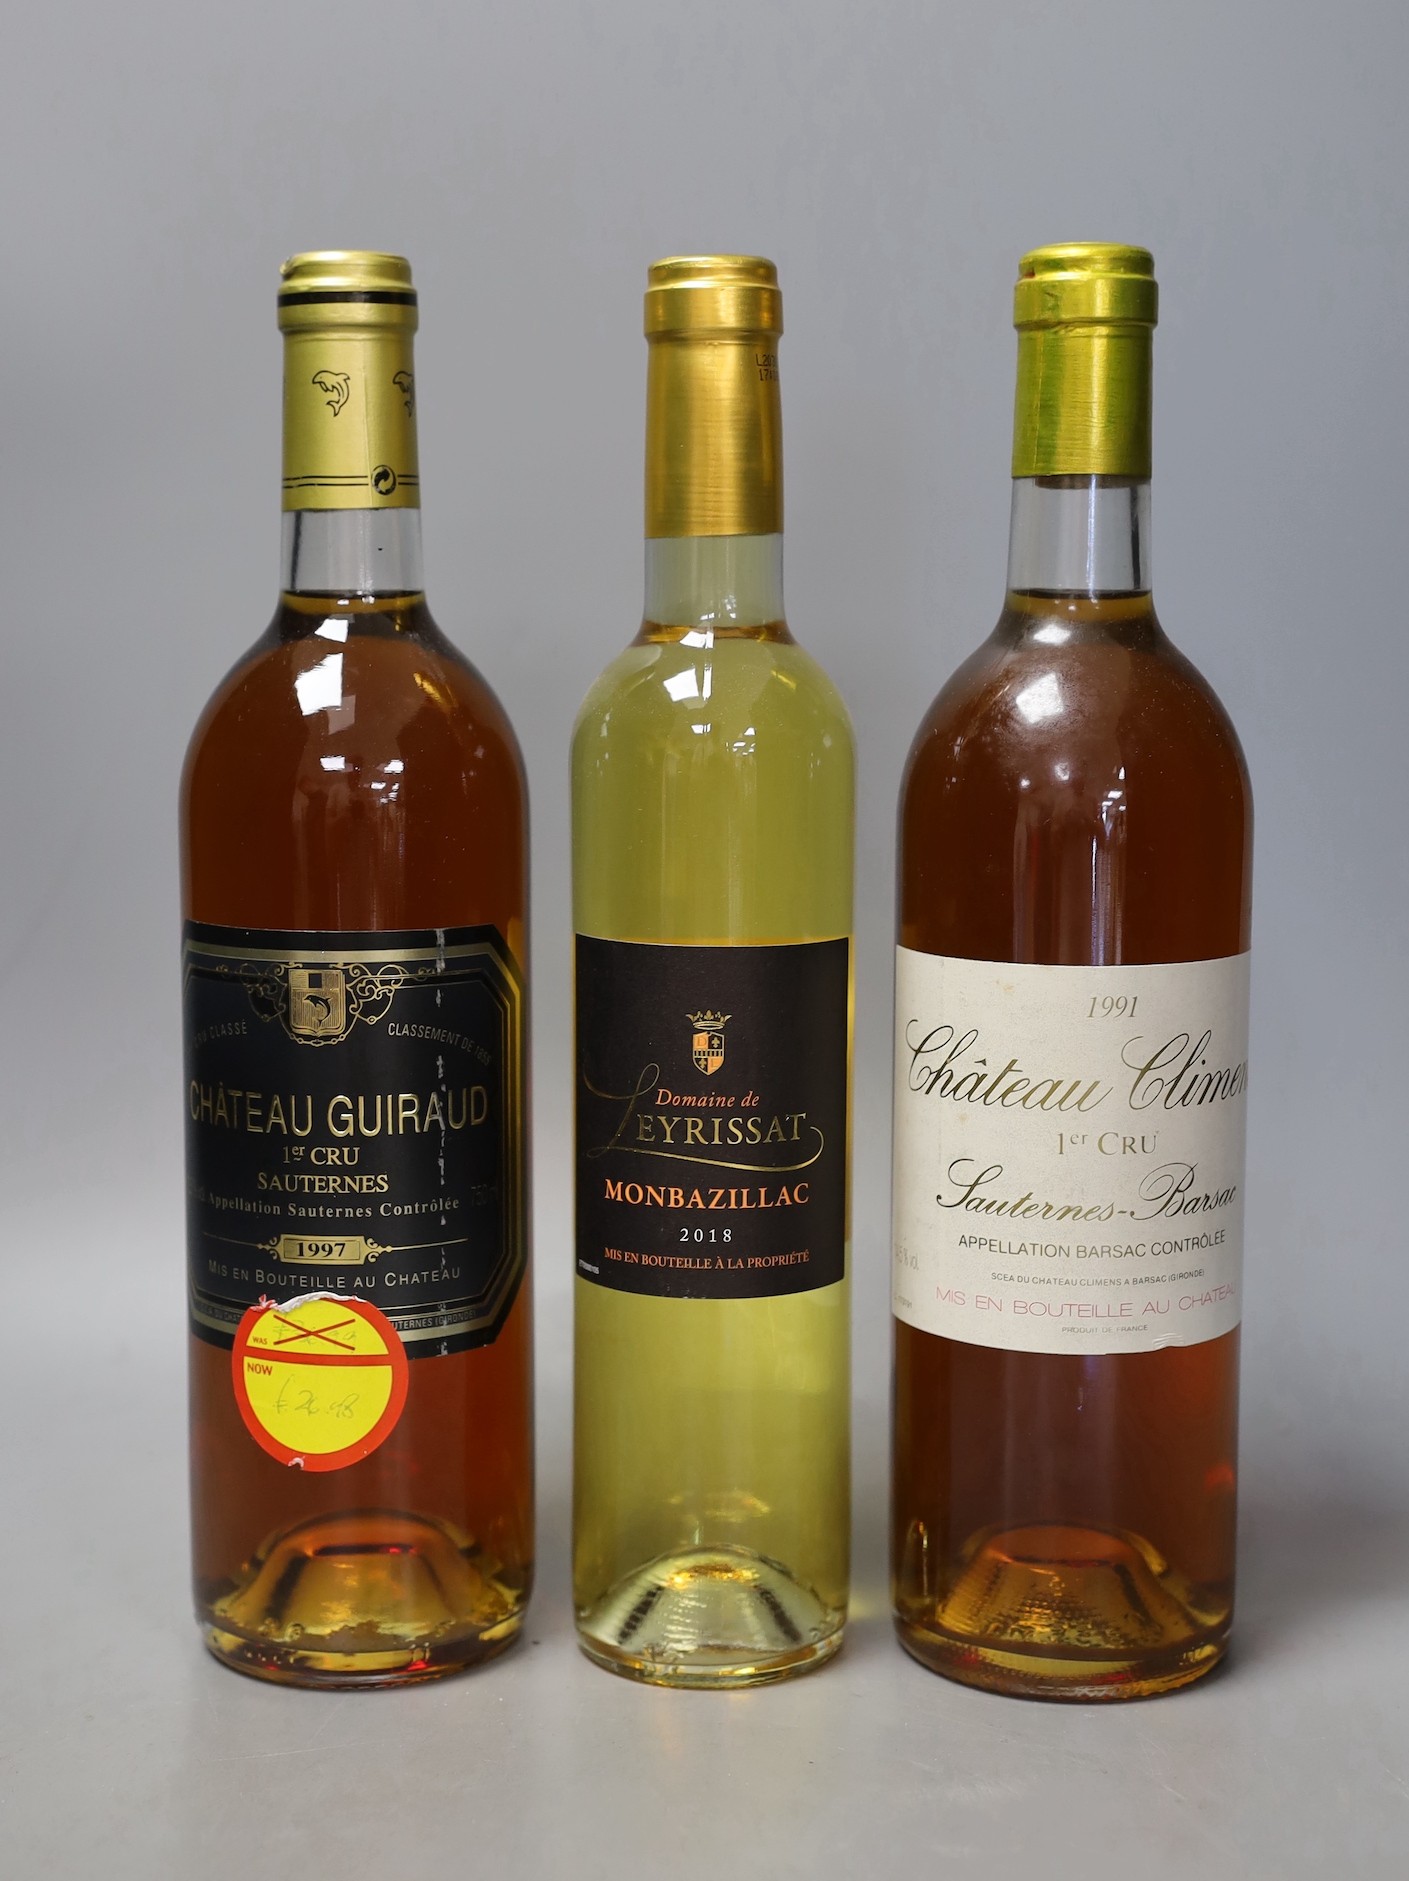 Twelve bottles of 1991 Chateau Climens Barsac, together with three bottles of 1997 Château Guiraud, and three bottles of Domaine de Eyrissat (18)